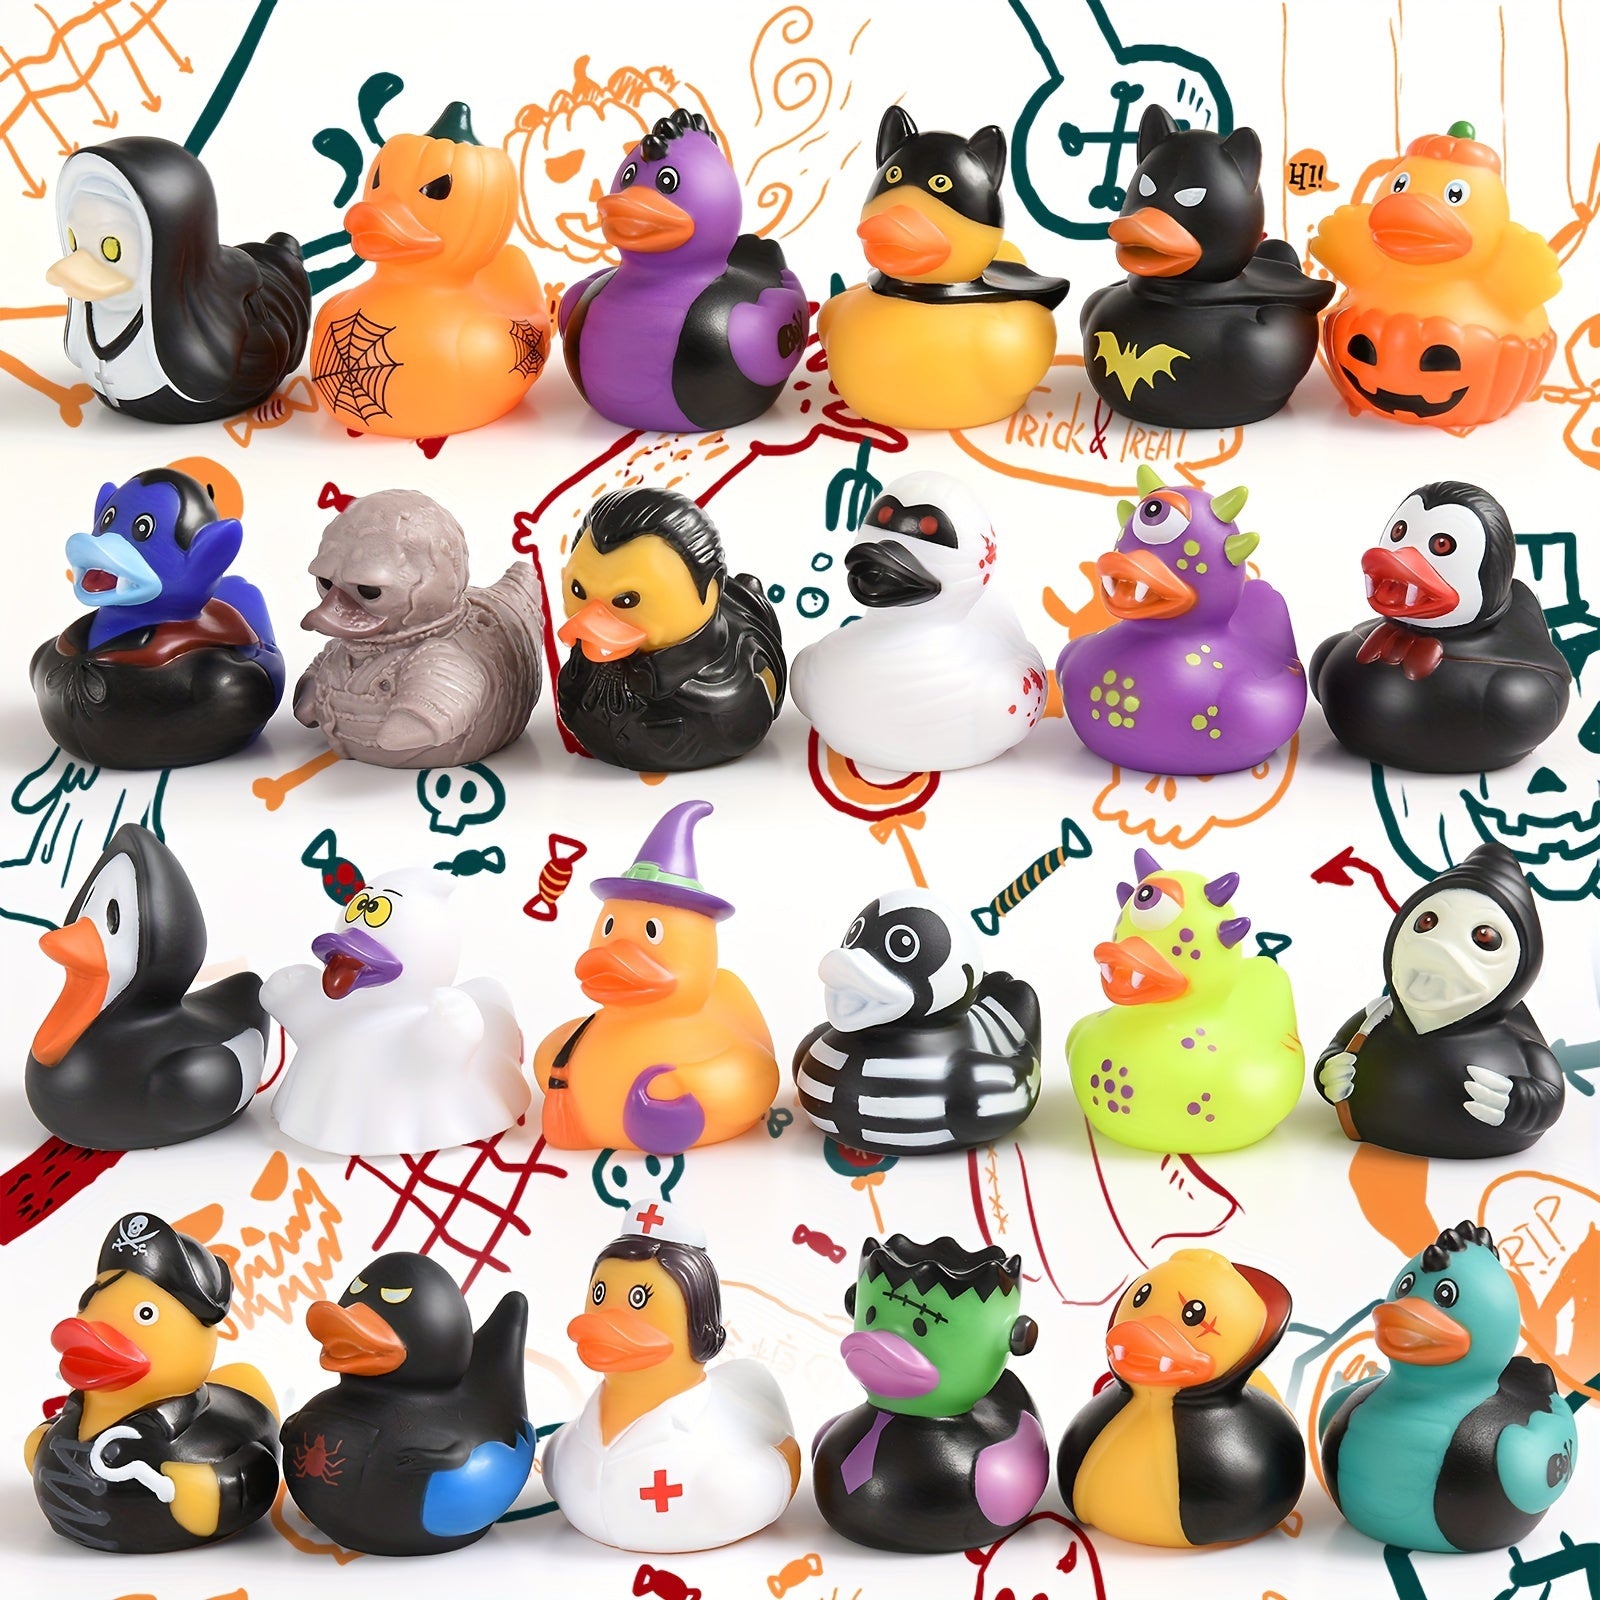 24pcs, Halloween Party Favors Rubber Ducks, Bath Toys Assorted Duckies (2"), Kids Halloween Decor Supplies, Trick Or Treat Supplies, Goodie Bag Fillers Baby Showers Halloween Party Supplies